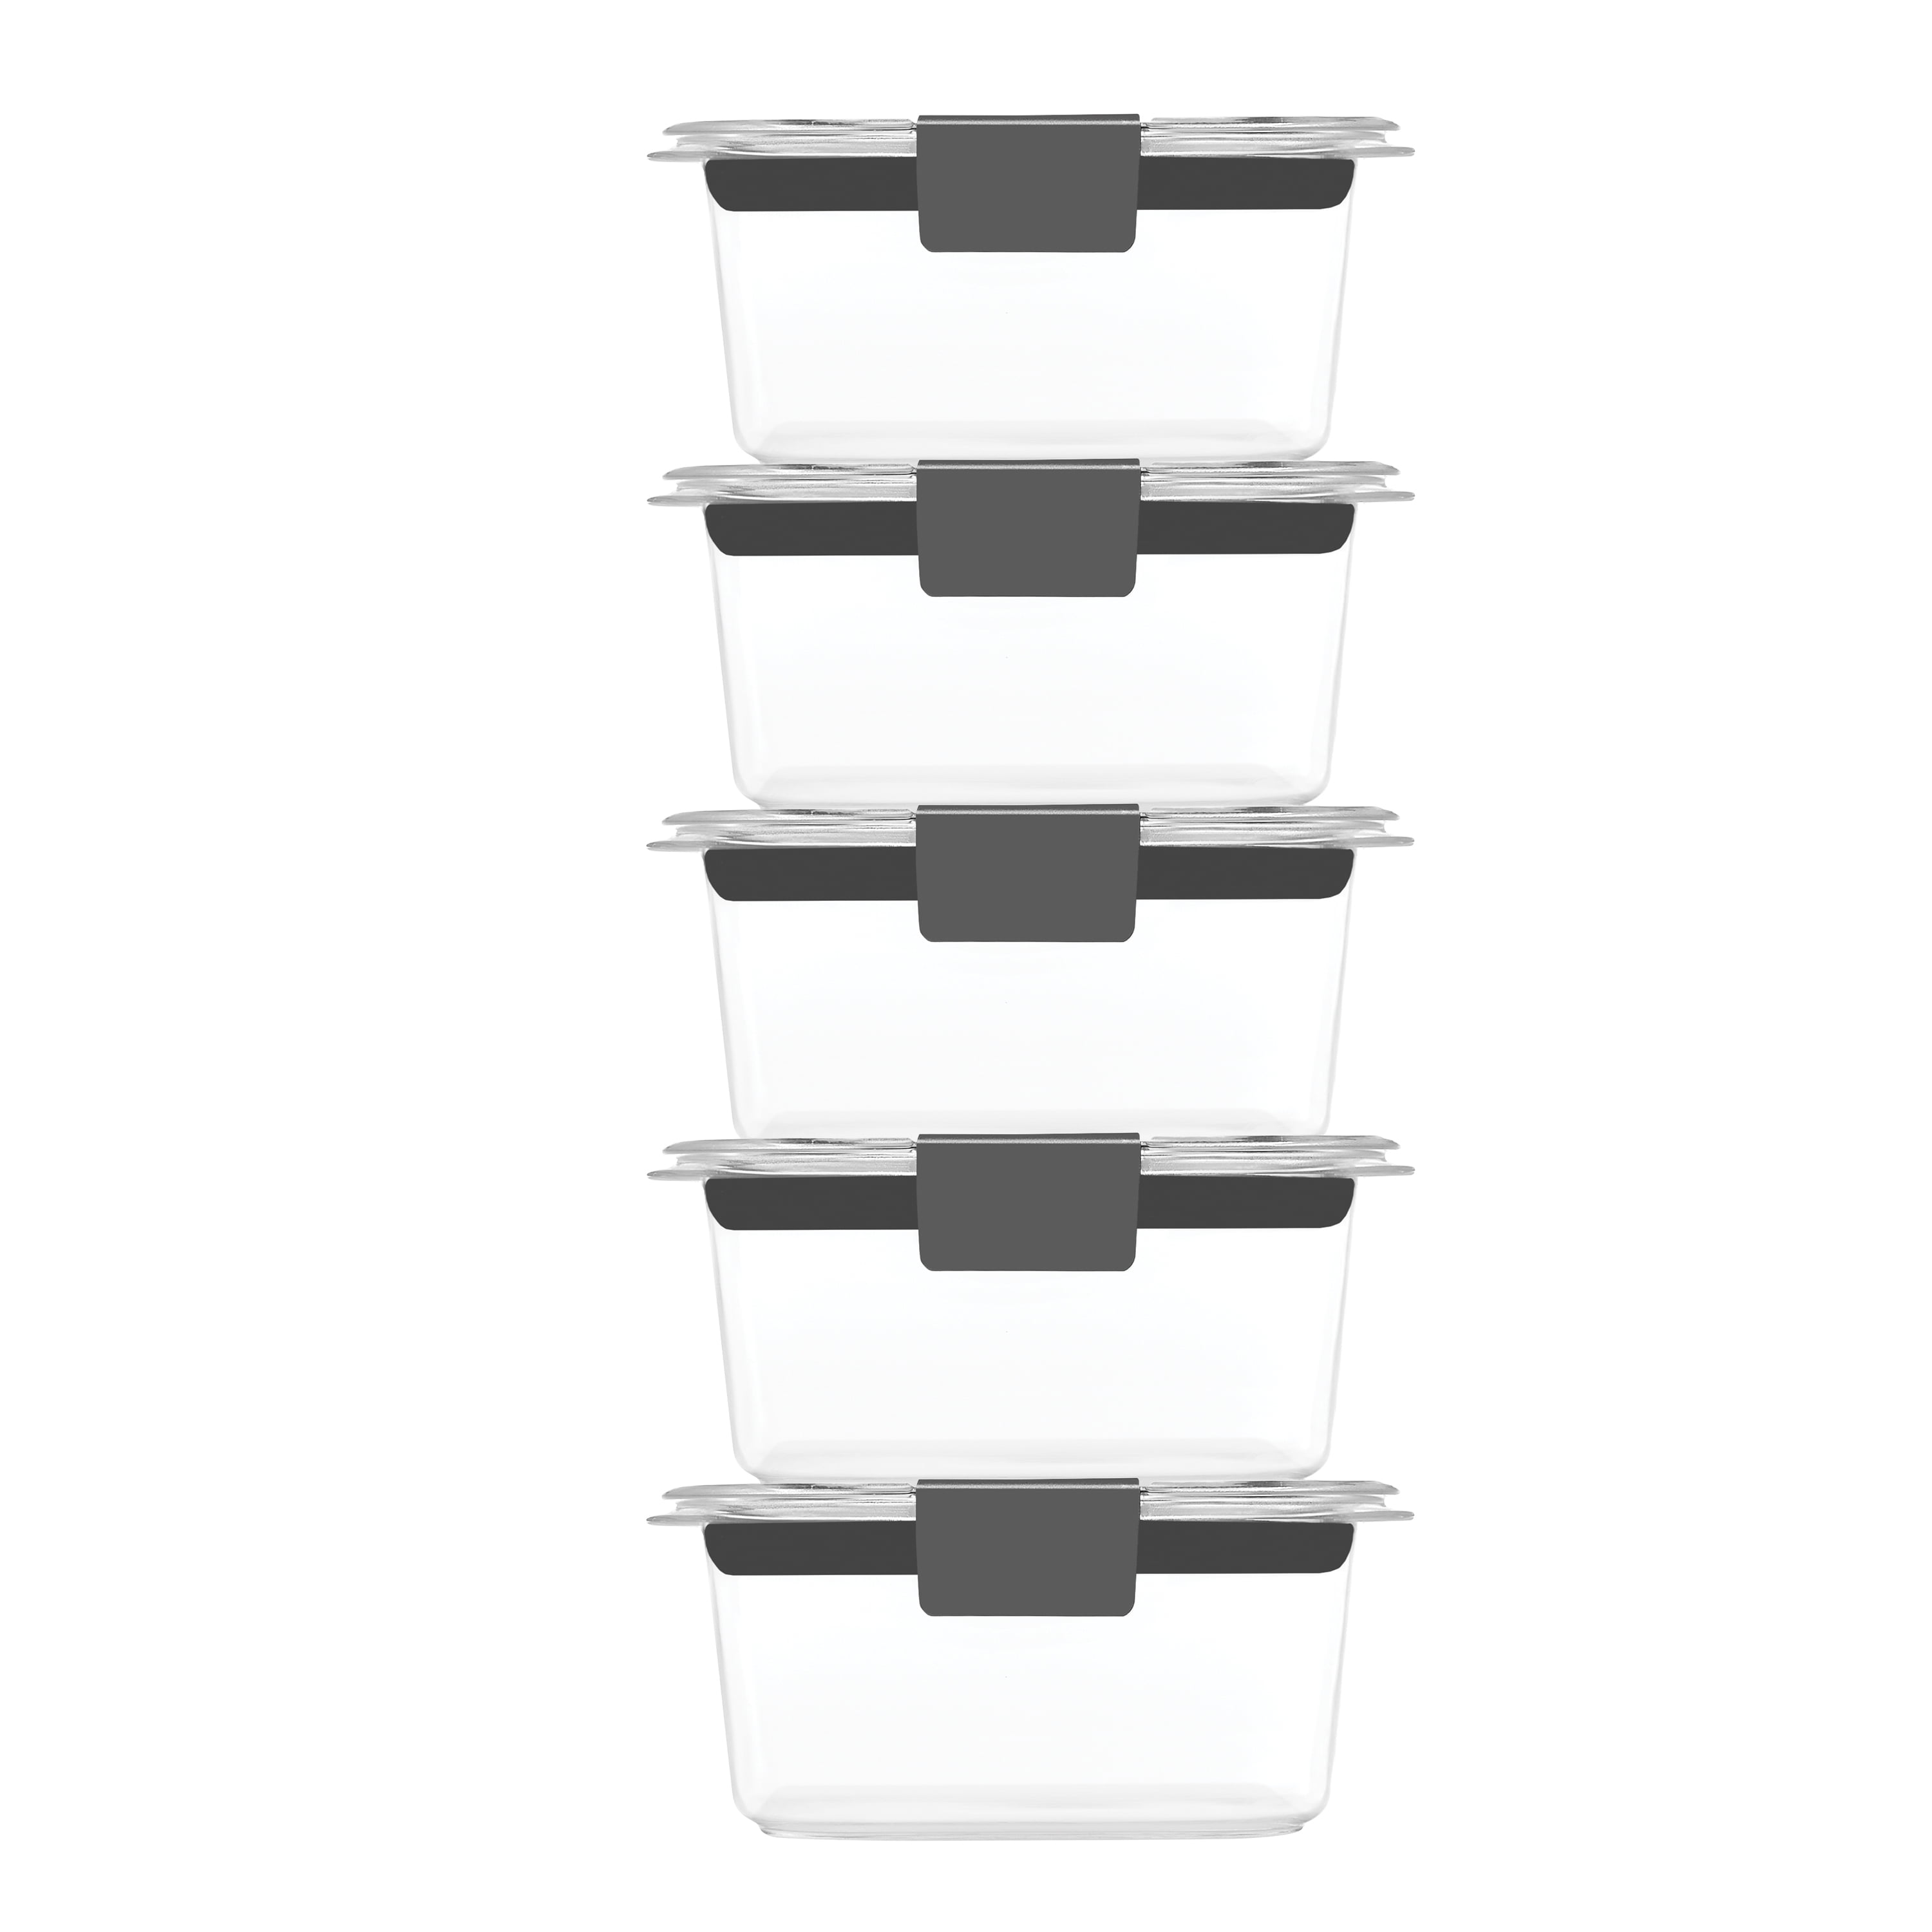 Rubbermaid Brilliance Food Storage Containers Set - Zars Buy